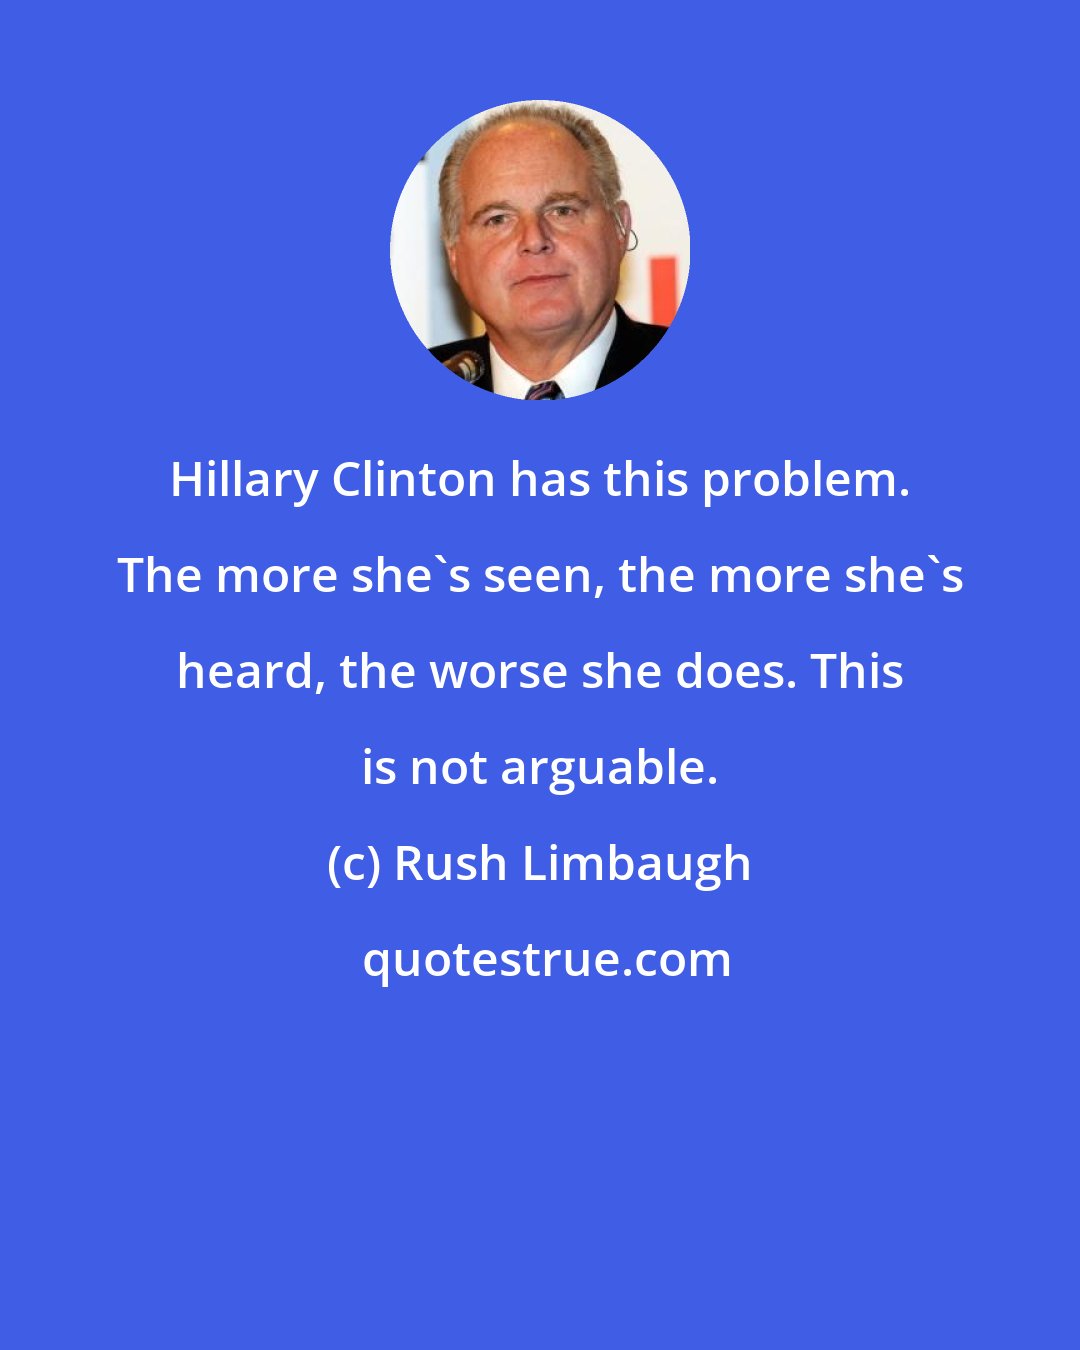 Rush Limbaugh: Hillary Clinton has this problem. The more she's seen, the more she's heard, the worse she does. This is not arguable.